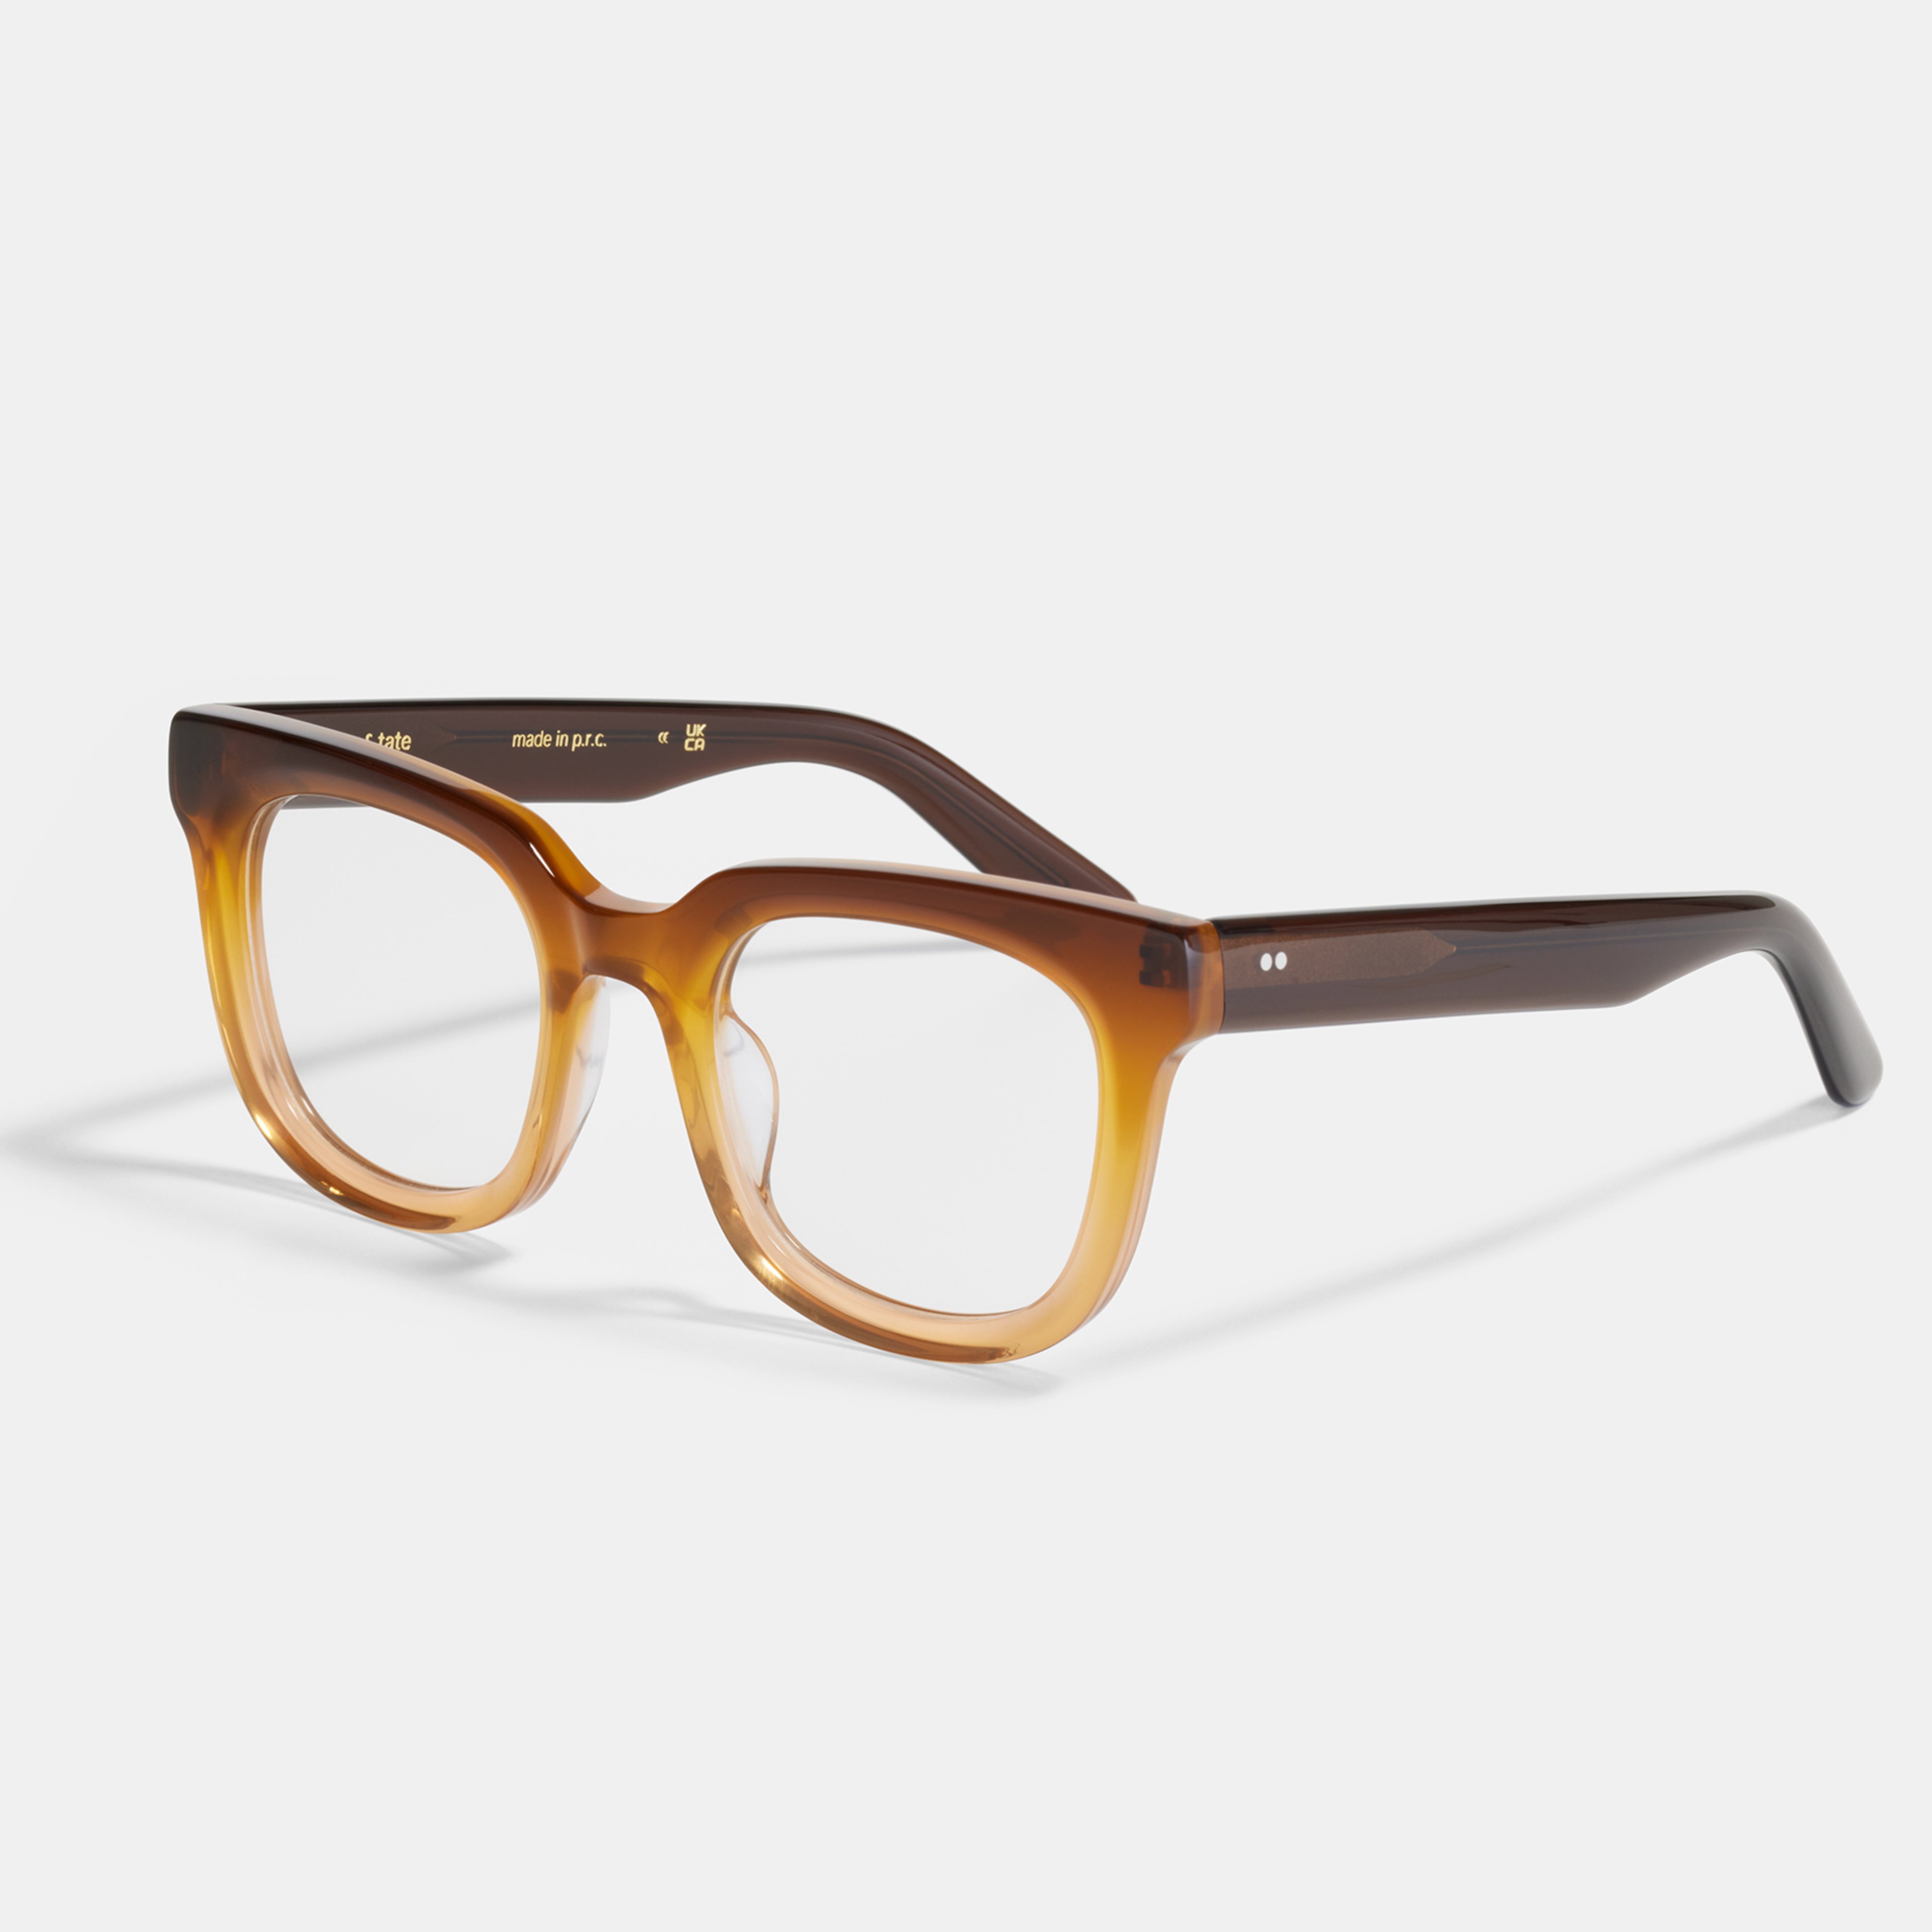 Ace & Tate Glasses | Round Renew bio acetate in Brown, Pink, Yellow